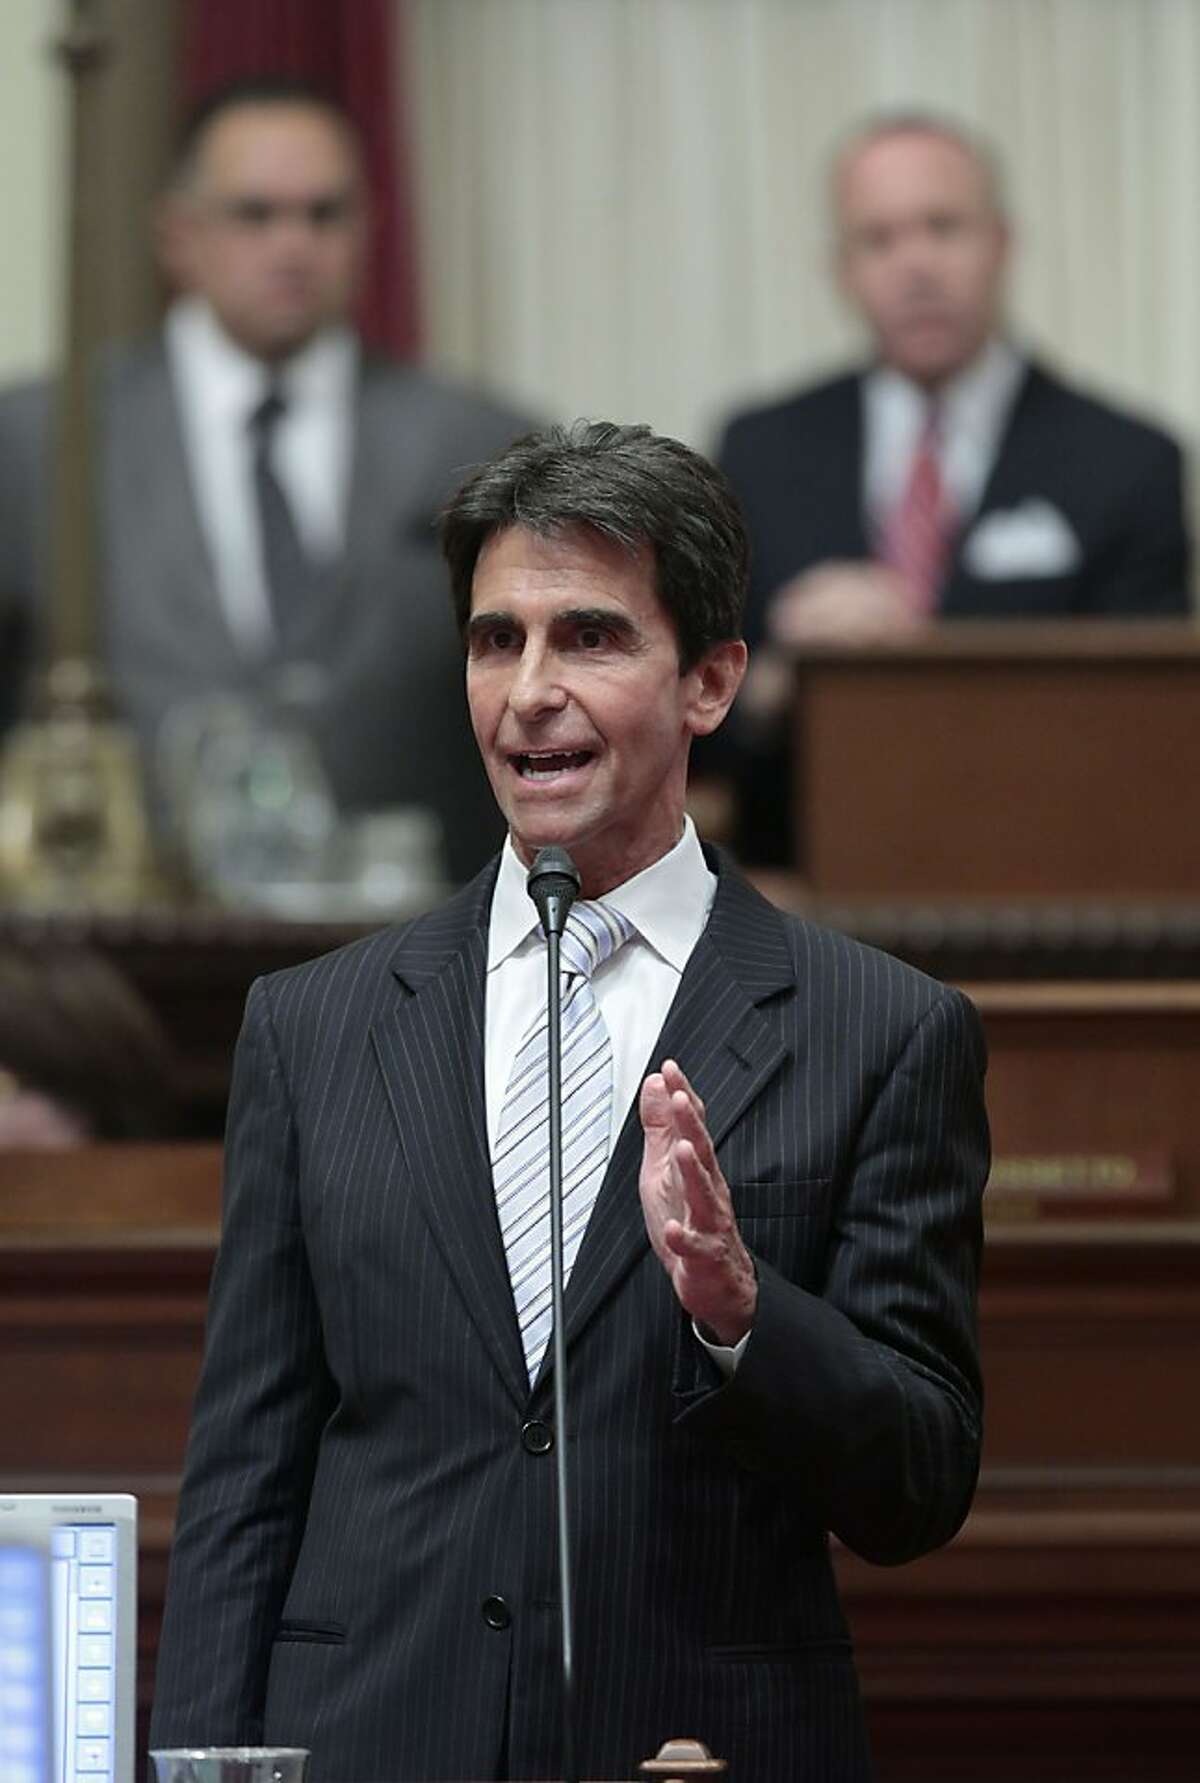 State Senate Budget Committee chairman Mark Leno, center, urges lawmakers to approve the 2012-13 state budget at the state Capitol in Sacramento, Calif., Friday, June 15, 2012. The Senate approved the budget plan by a 23-16 vote. The budget was later approved by the Assembly, 50-25 and sent to the governor. (AP Photo/Rich Pedroncelli)